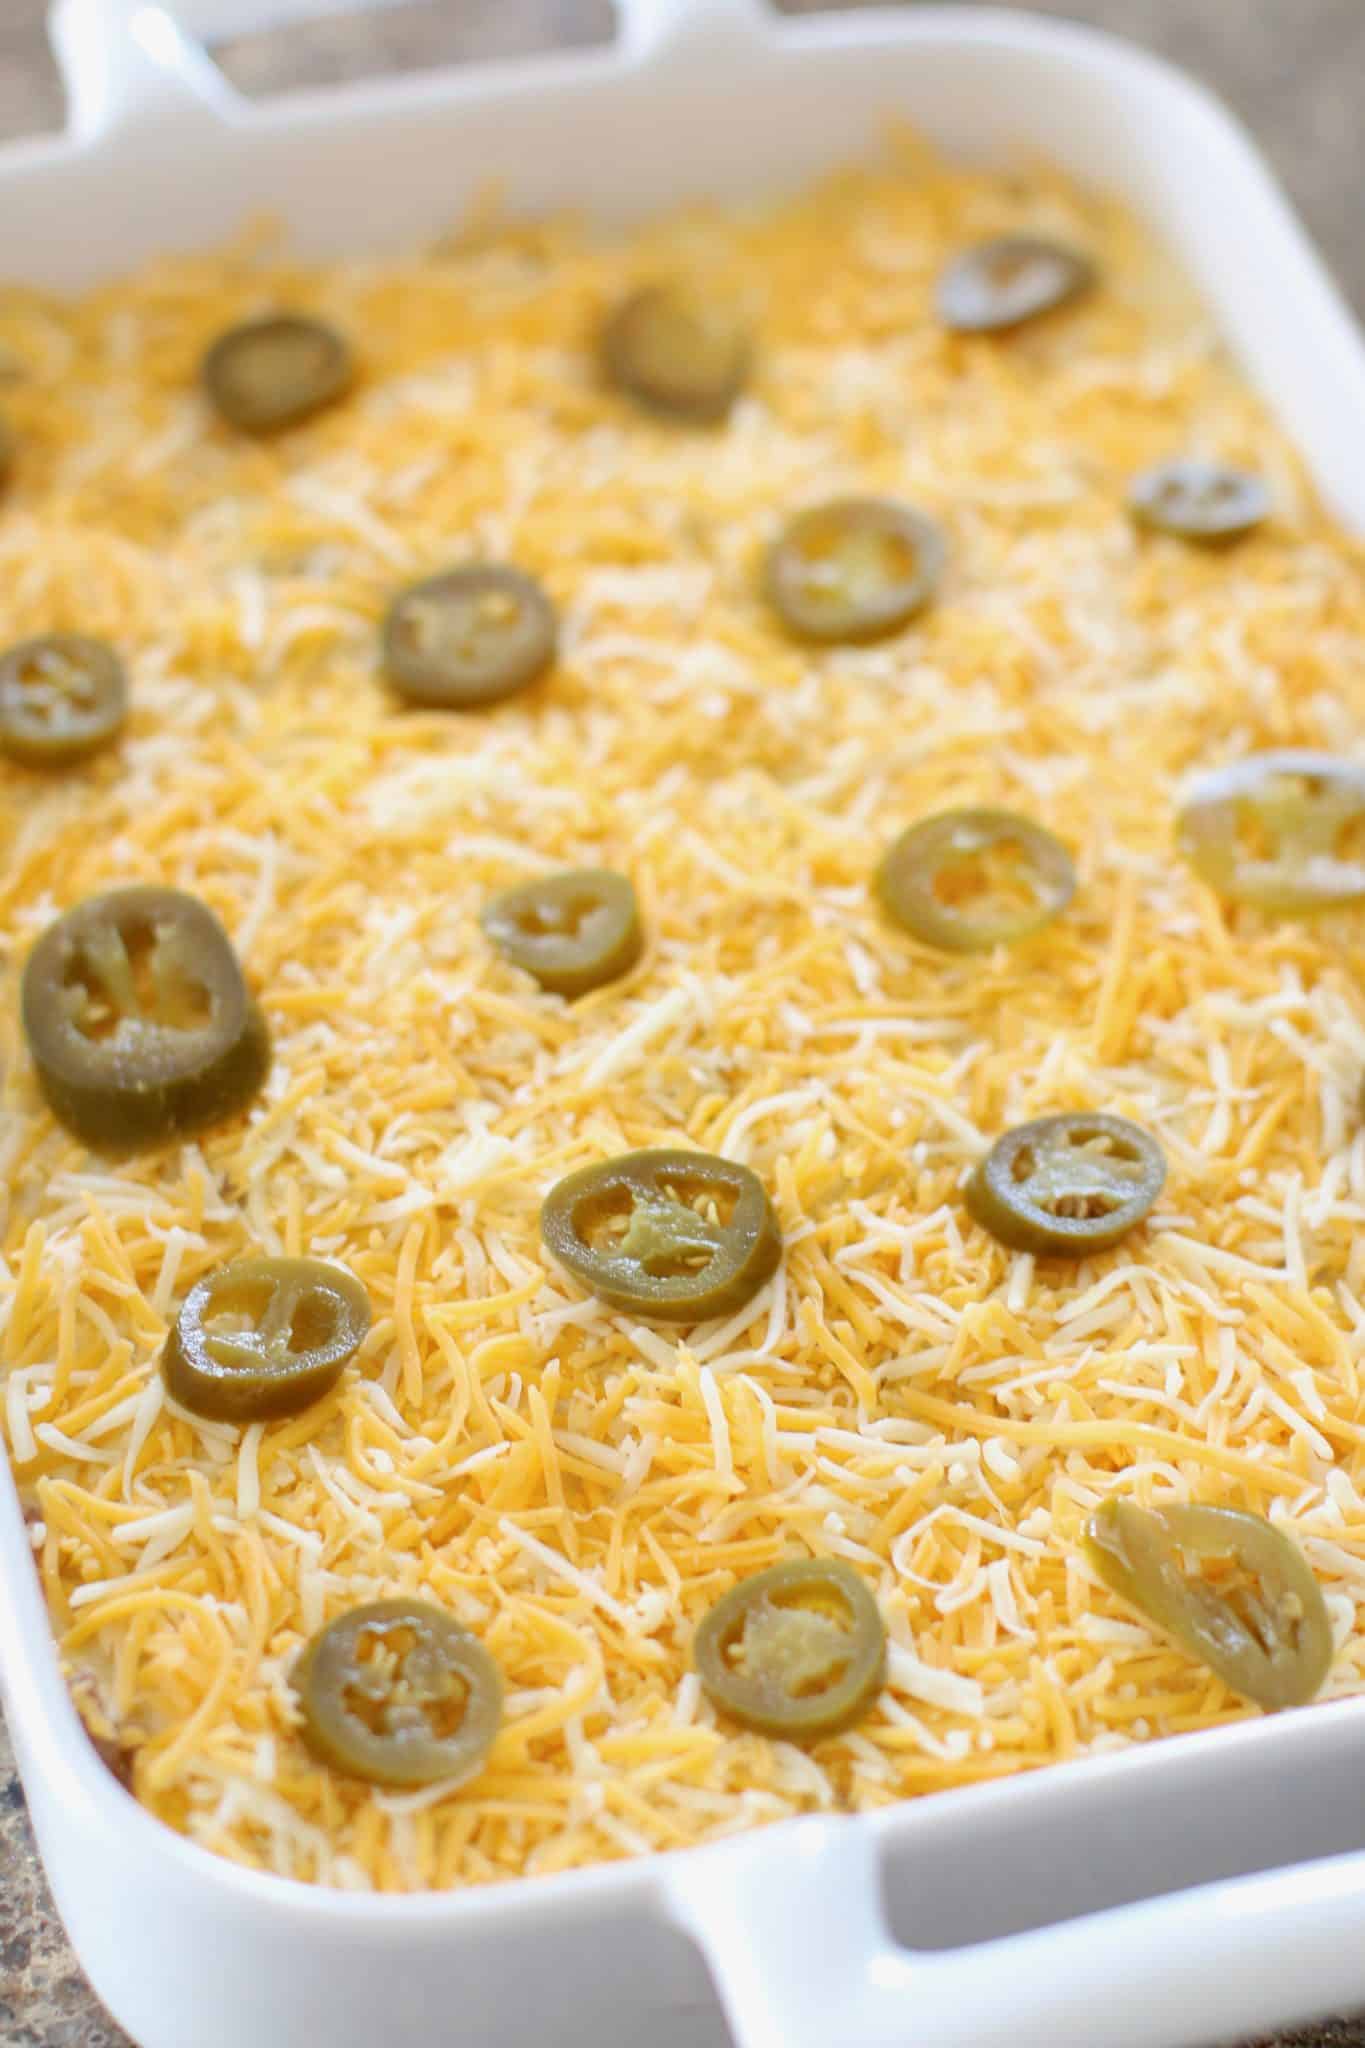 shredded cheese layered on top of casserole mixture and topped with slices of jalapeños.